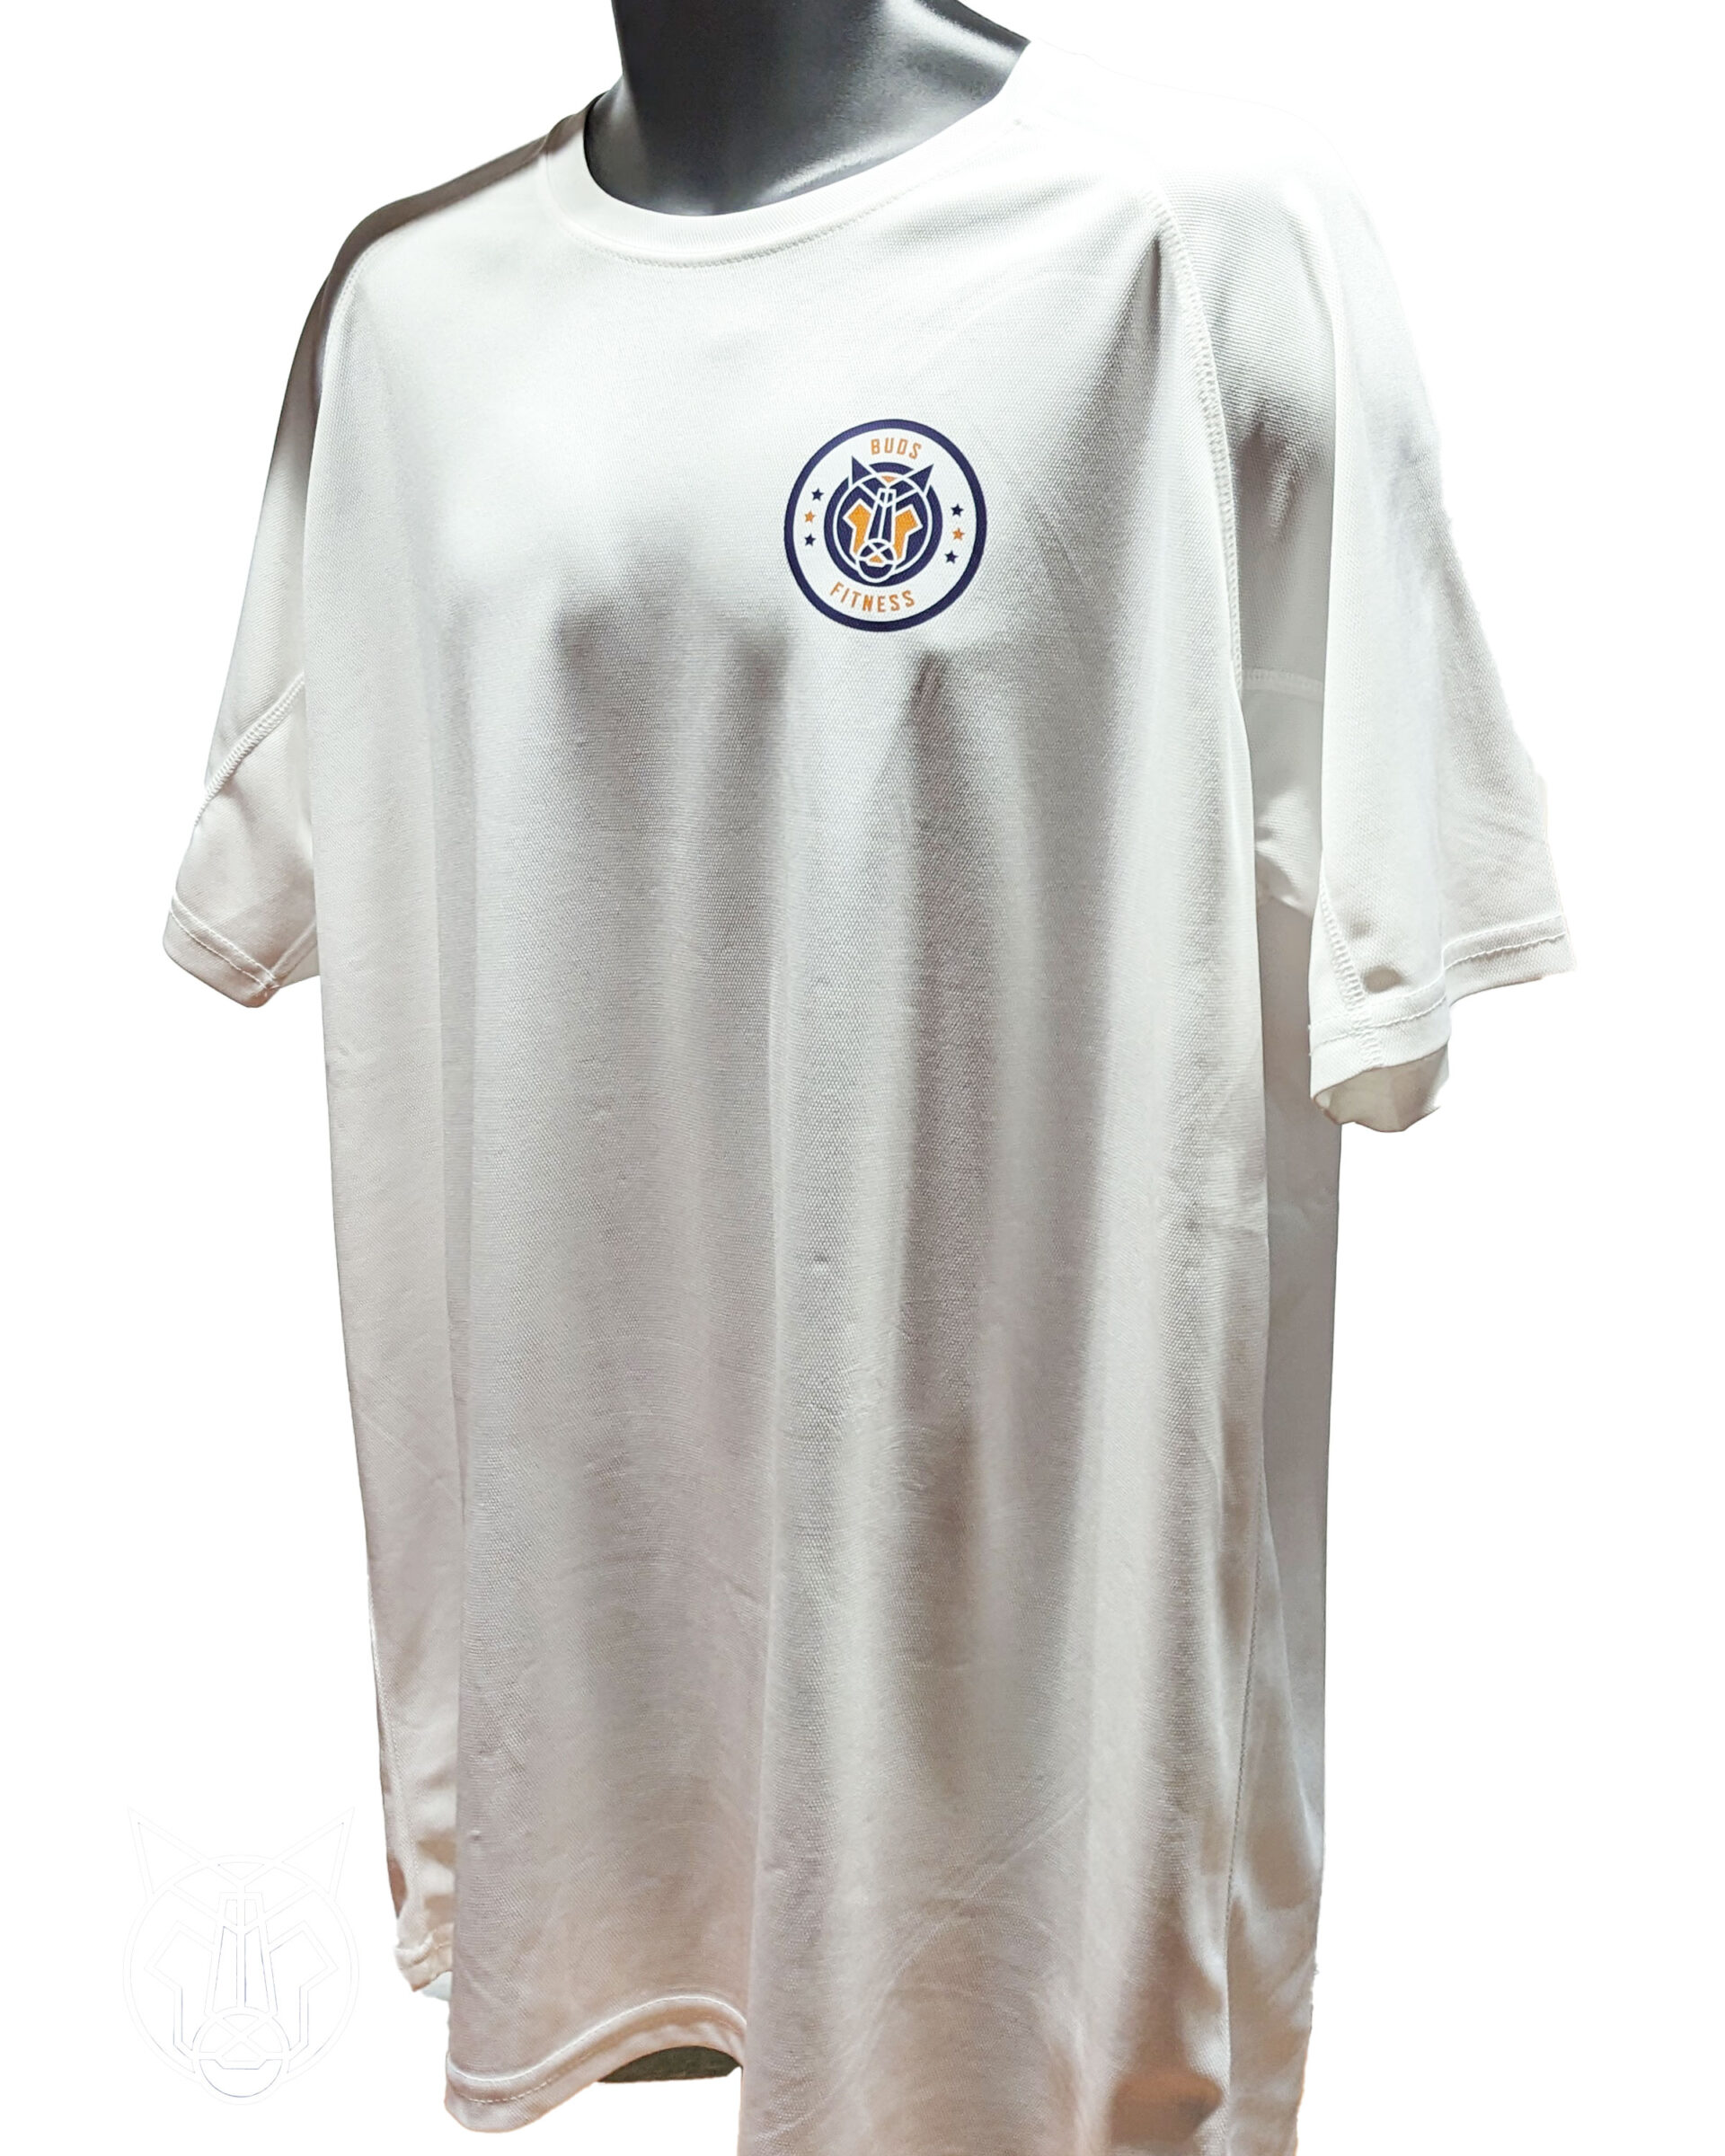 Buds Fitness - Quick drying, comfort fit t shirt